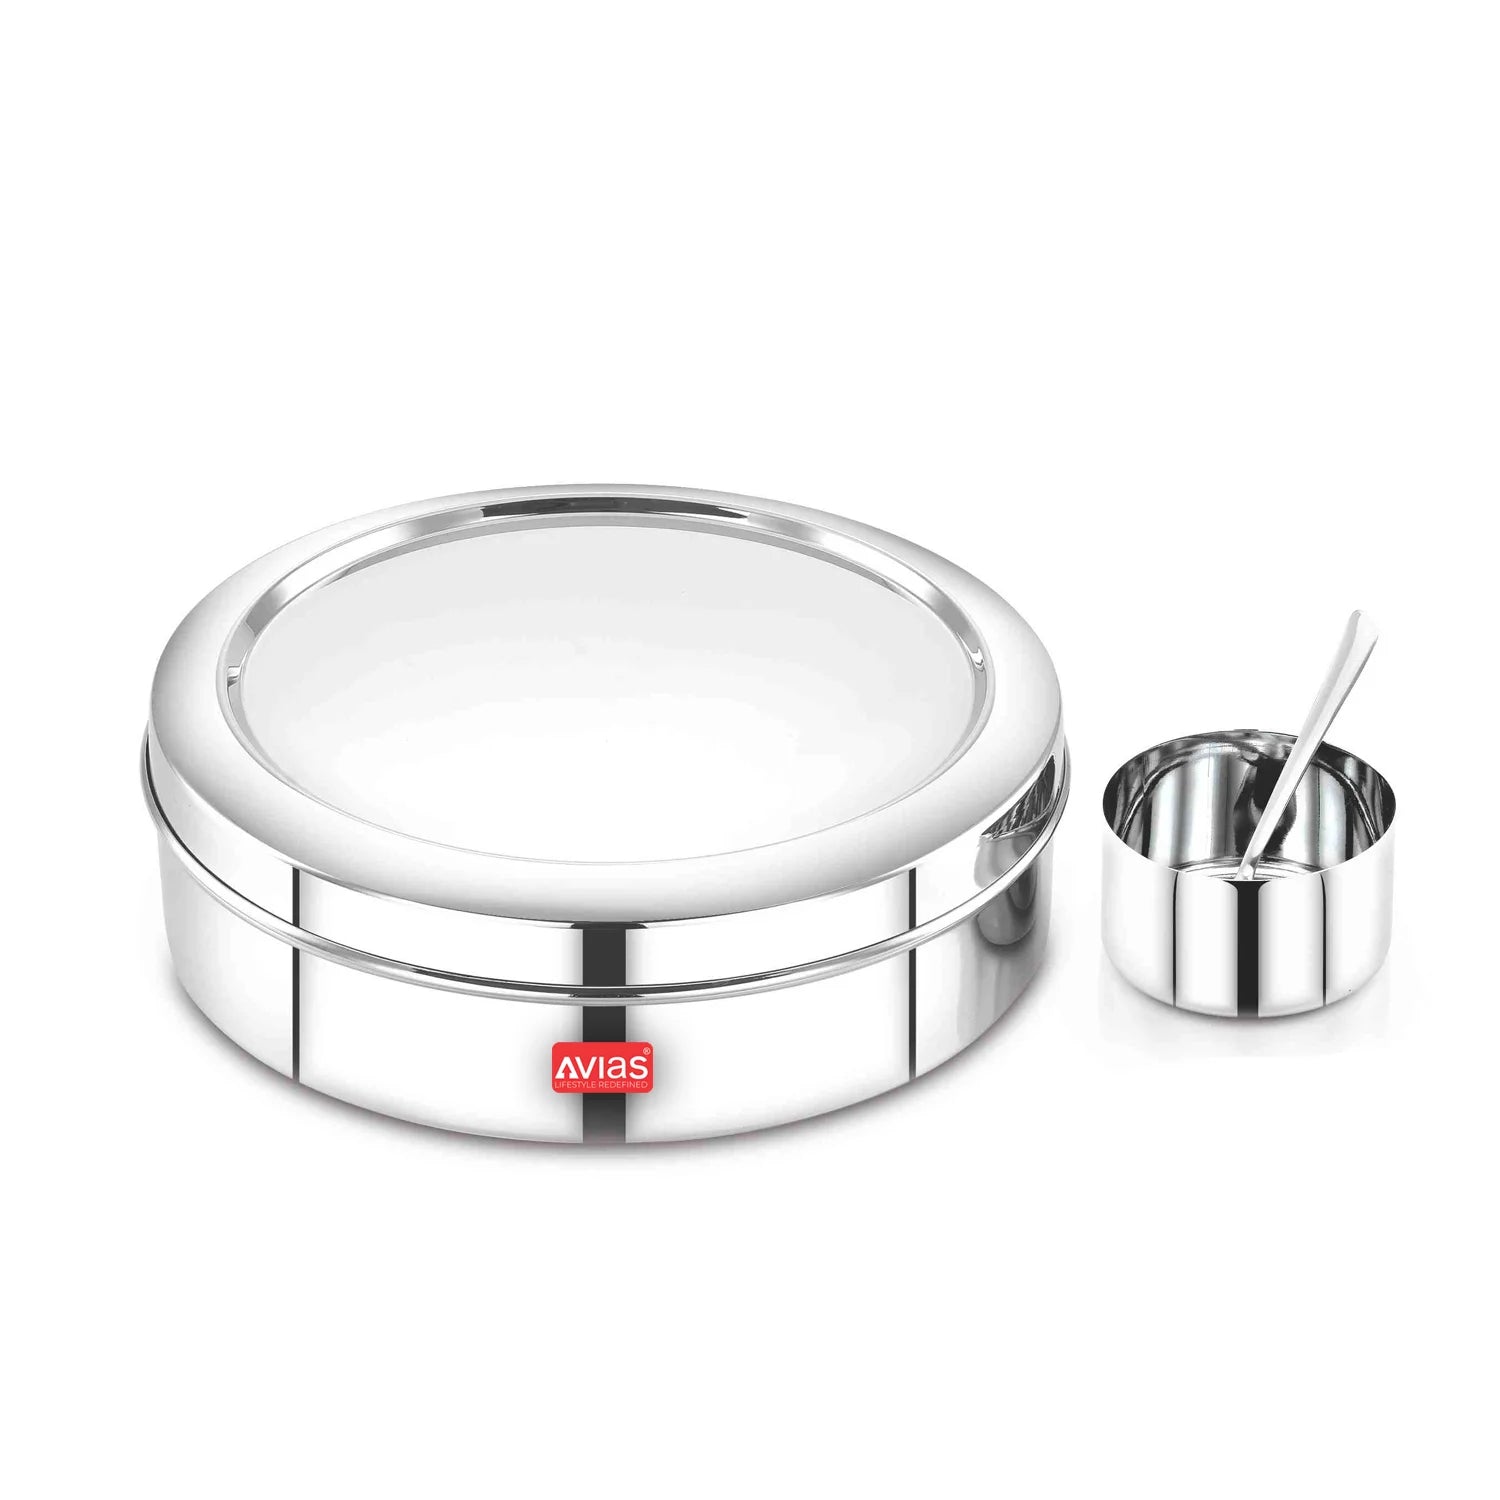 AVIAS Stainless Steel Elegant Spice box/Organiser with SS lid for kitchen